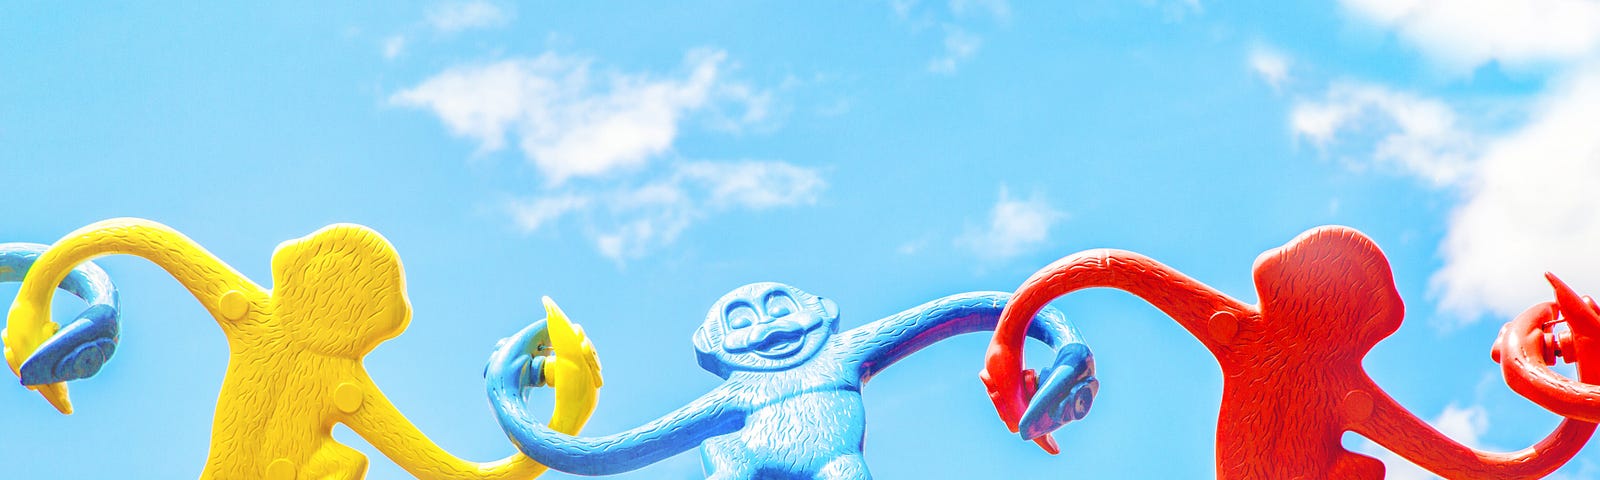 3 colorful primary colored monkey game pieces that hook arms for hanging off each other normally are now placed in a horizontal line a float against blue skies as if holding hands in harmony — every monkey’s body/face alternating facing front and back.